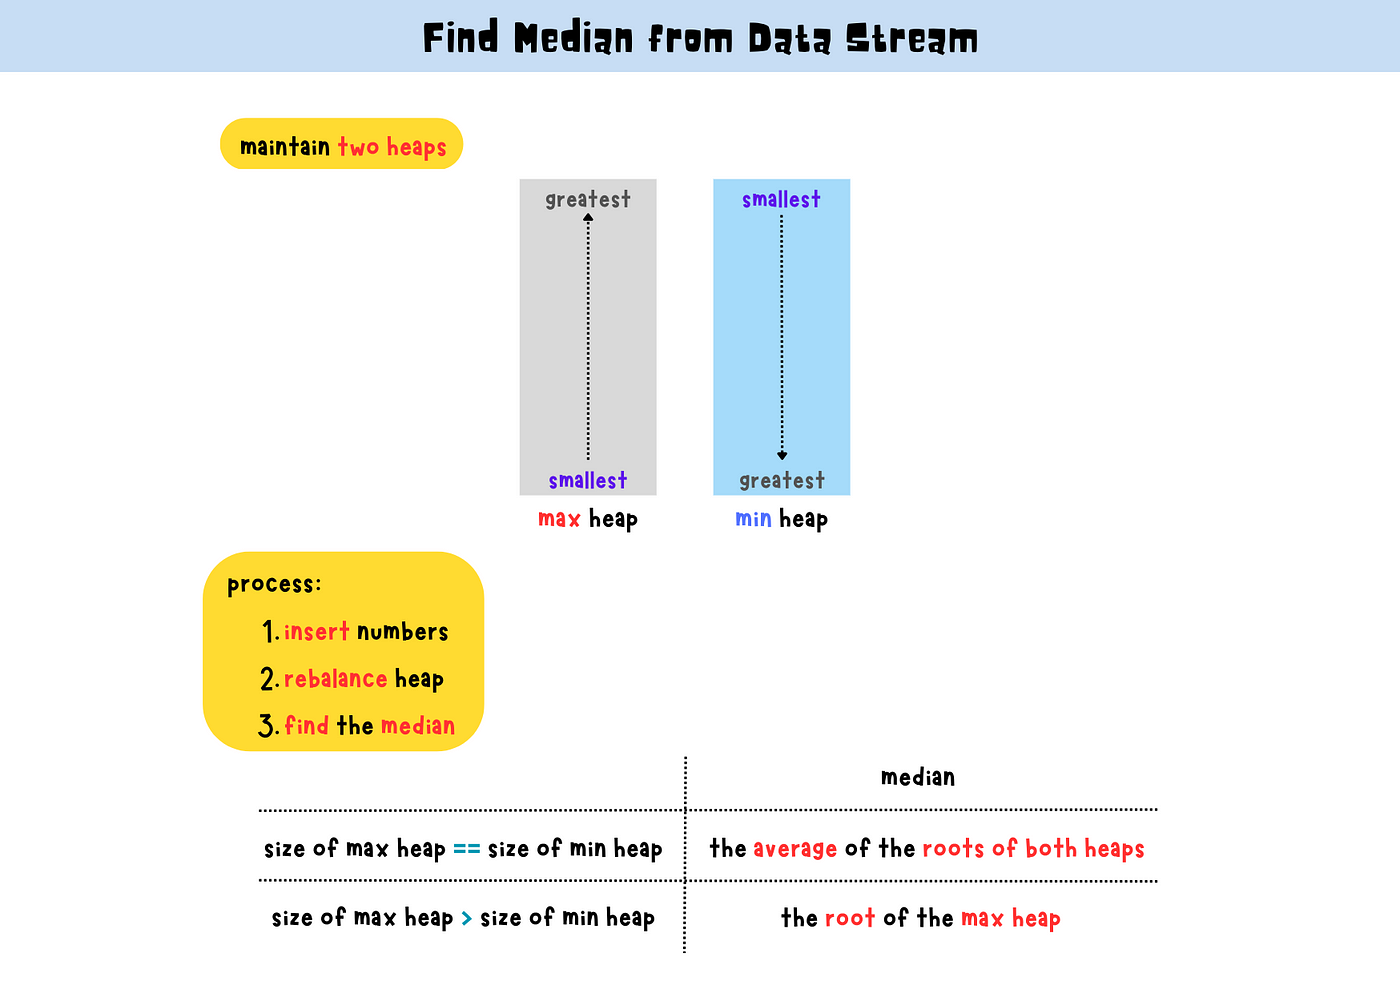 LeetCode 295: Find Median from Data Stream, by Claire Lee